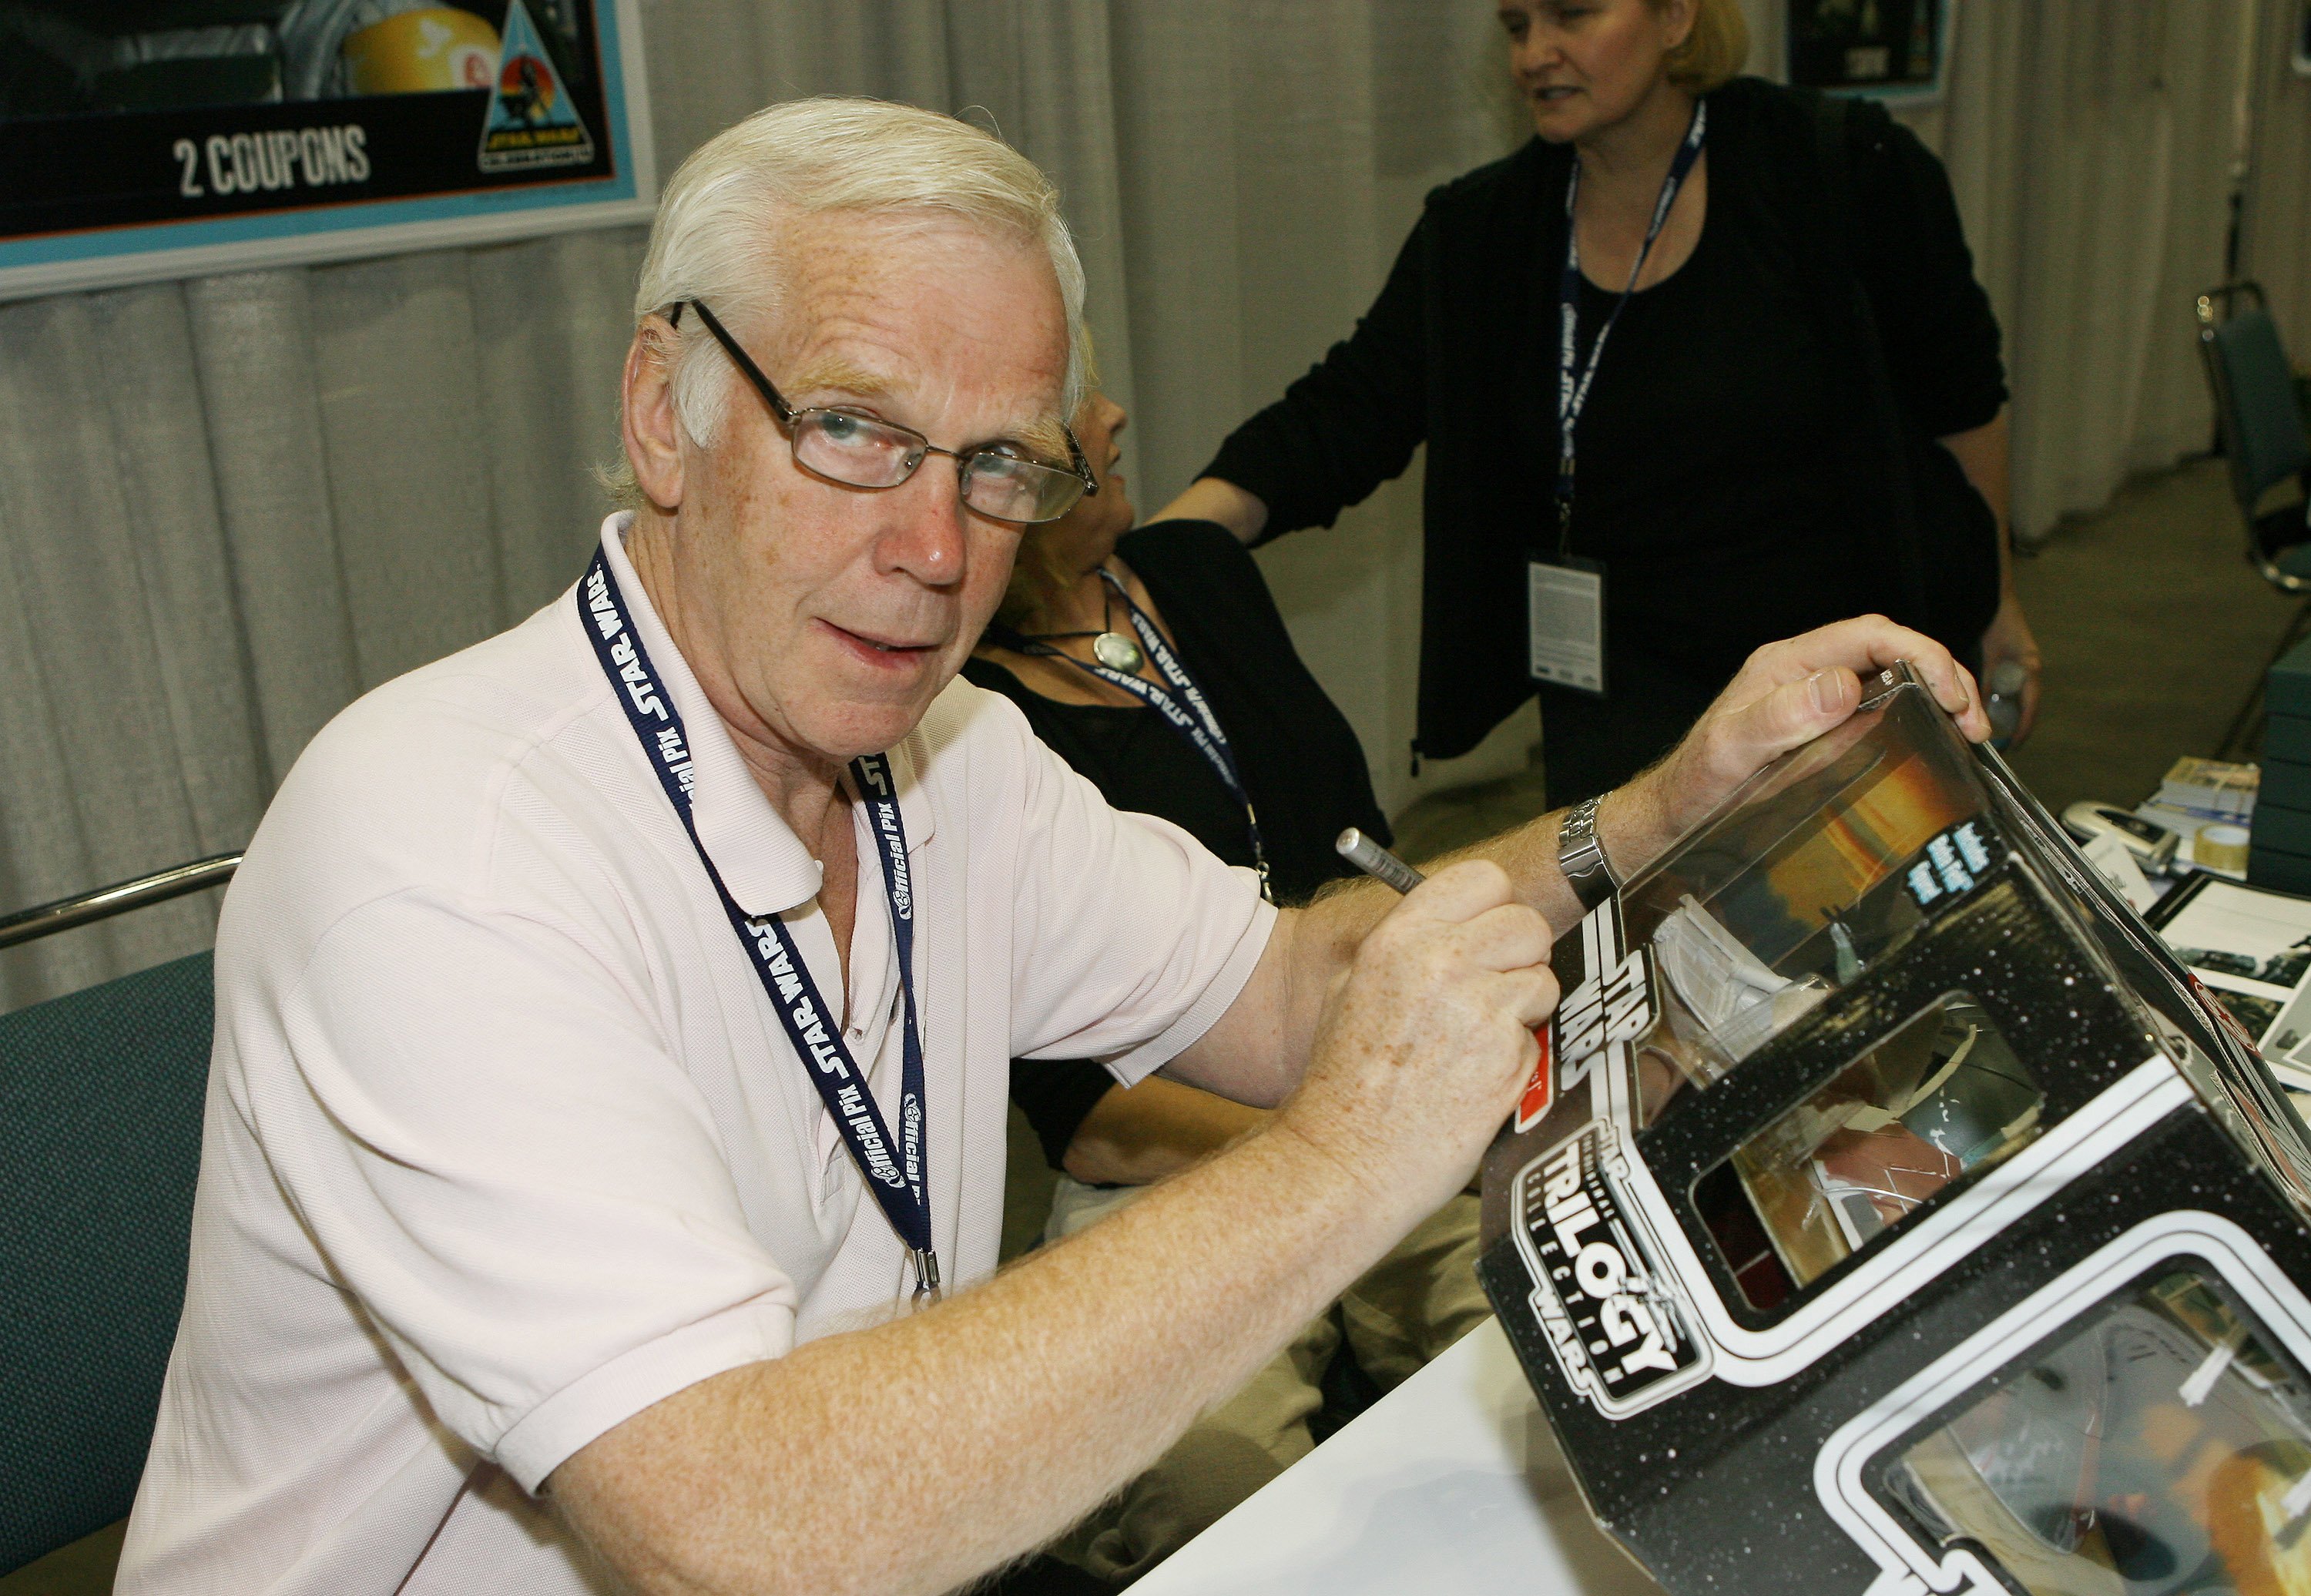 Jeremy Bulloch during "Star Wars" Celebration IV in May 2007. | Source: Getty Images.